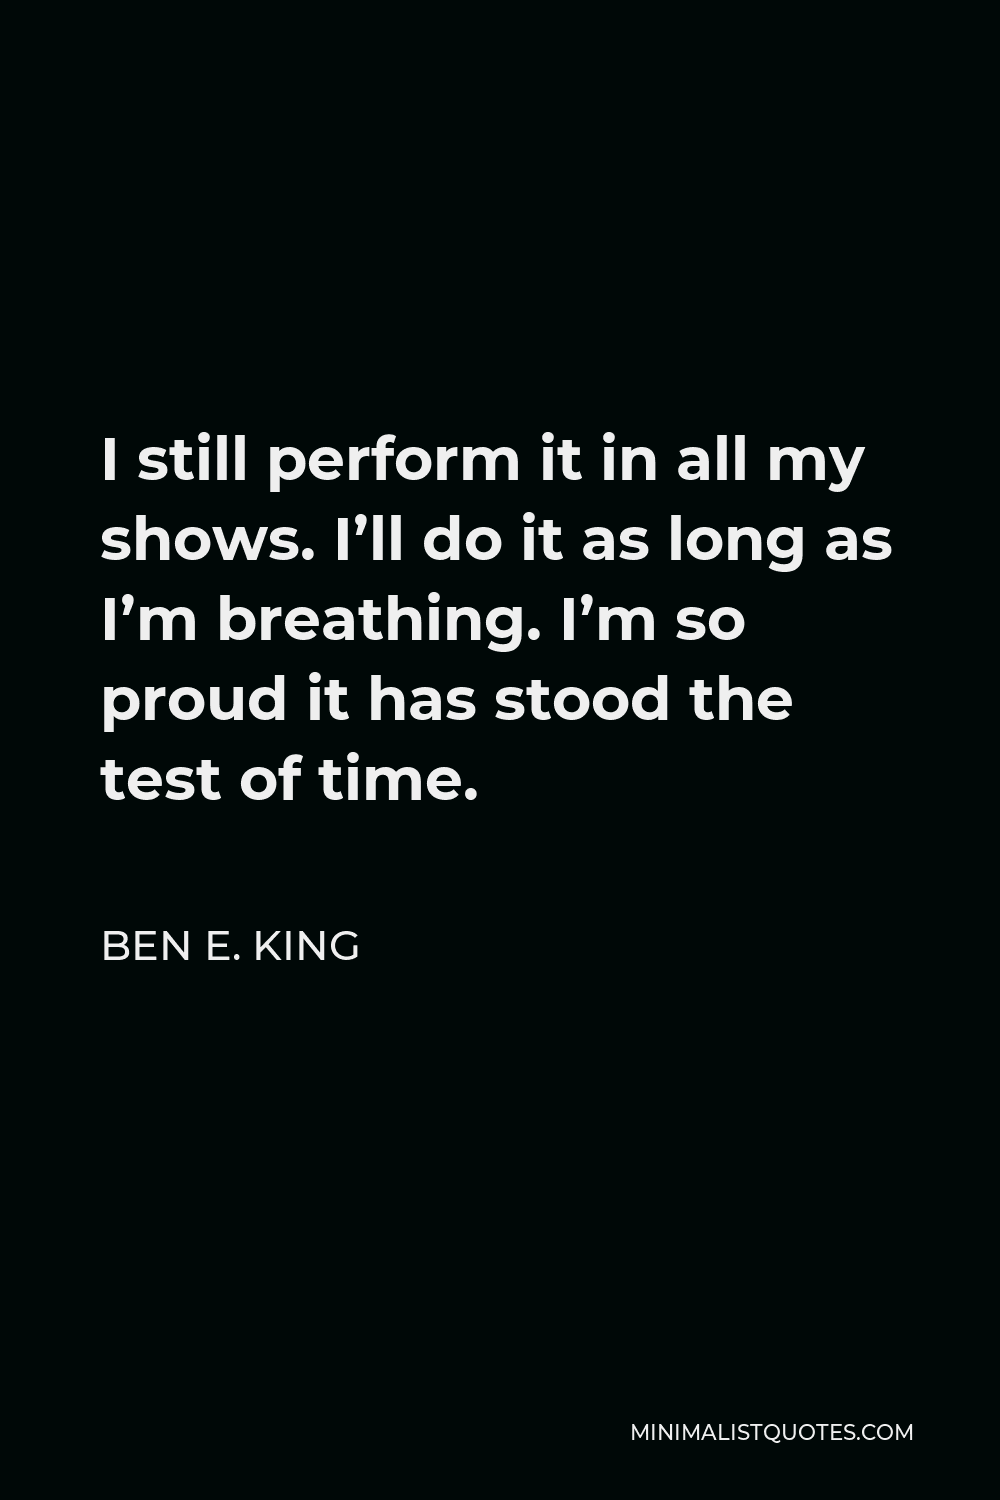 Ben E. King Quote - I still perform it in all my shows. I’ll do it as long as I’m breathing. I’m so proud it has stood the test of time.